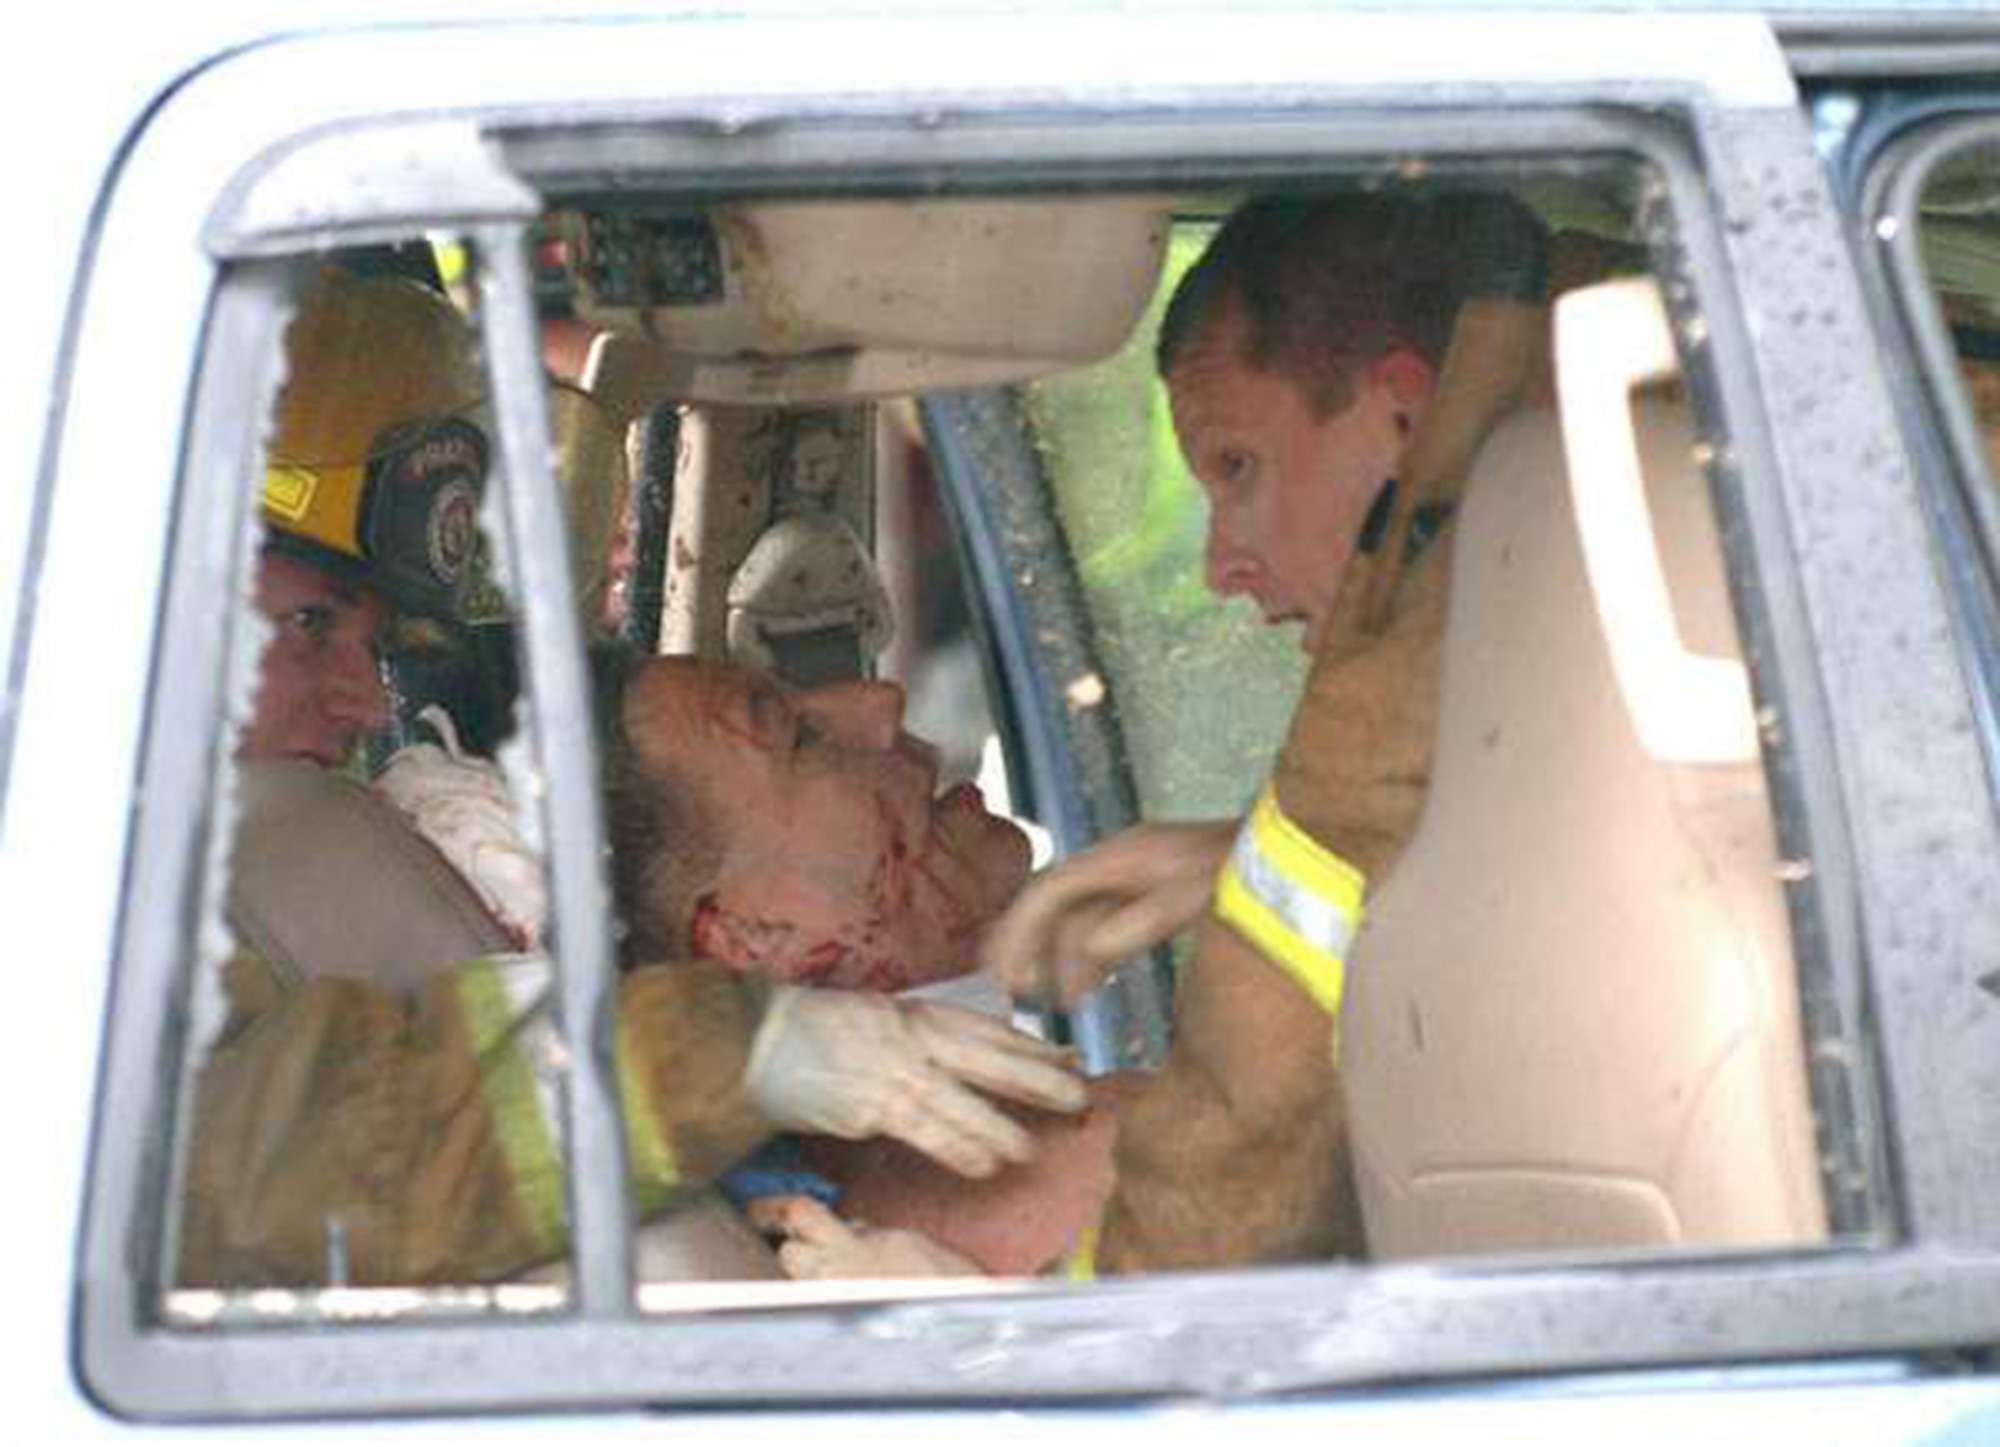 Trying to stabilize his neck and spine, firefighter Jared Maners and fire medic Roy Simpson carefully put a neck brace on Navy Commander Carl Forkner, who was critically injured when the EF-3 tornado slammed into his vehicle. (Photo by Lloyd Gallman, Montgomery Advertiser)